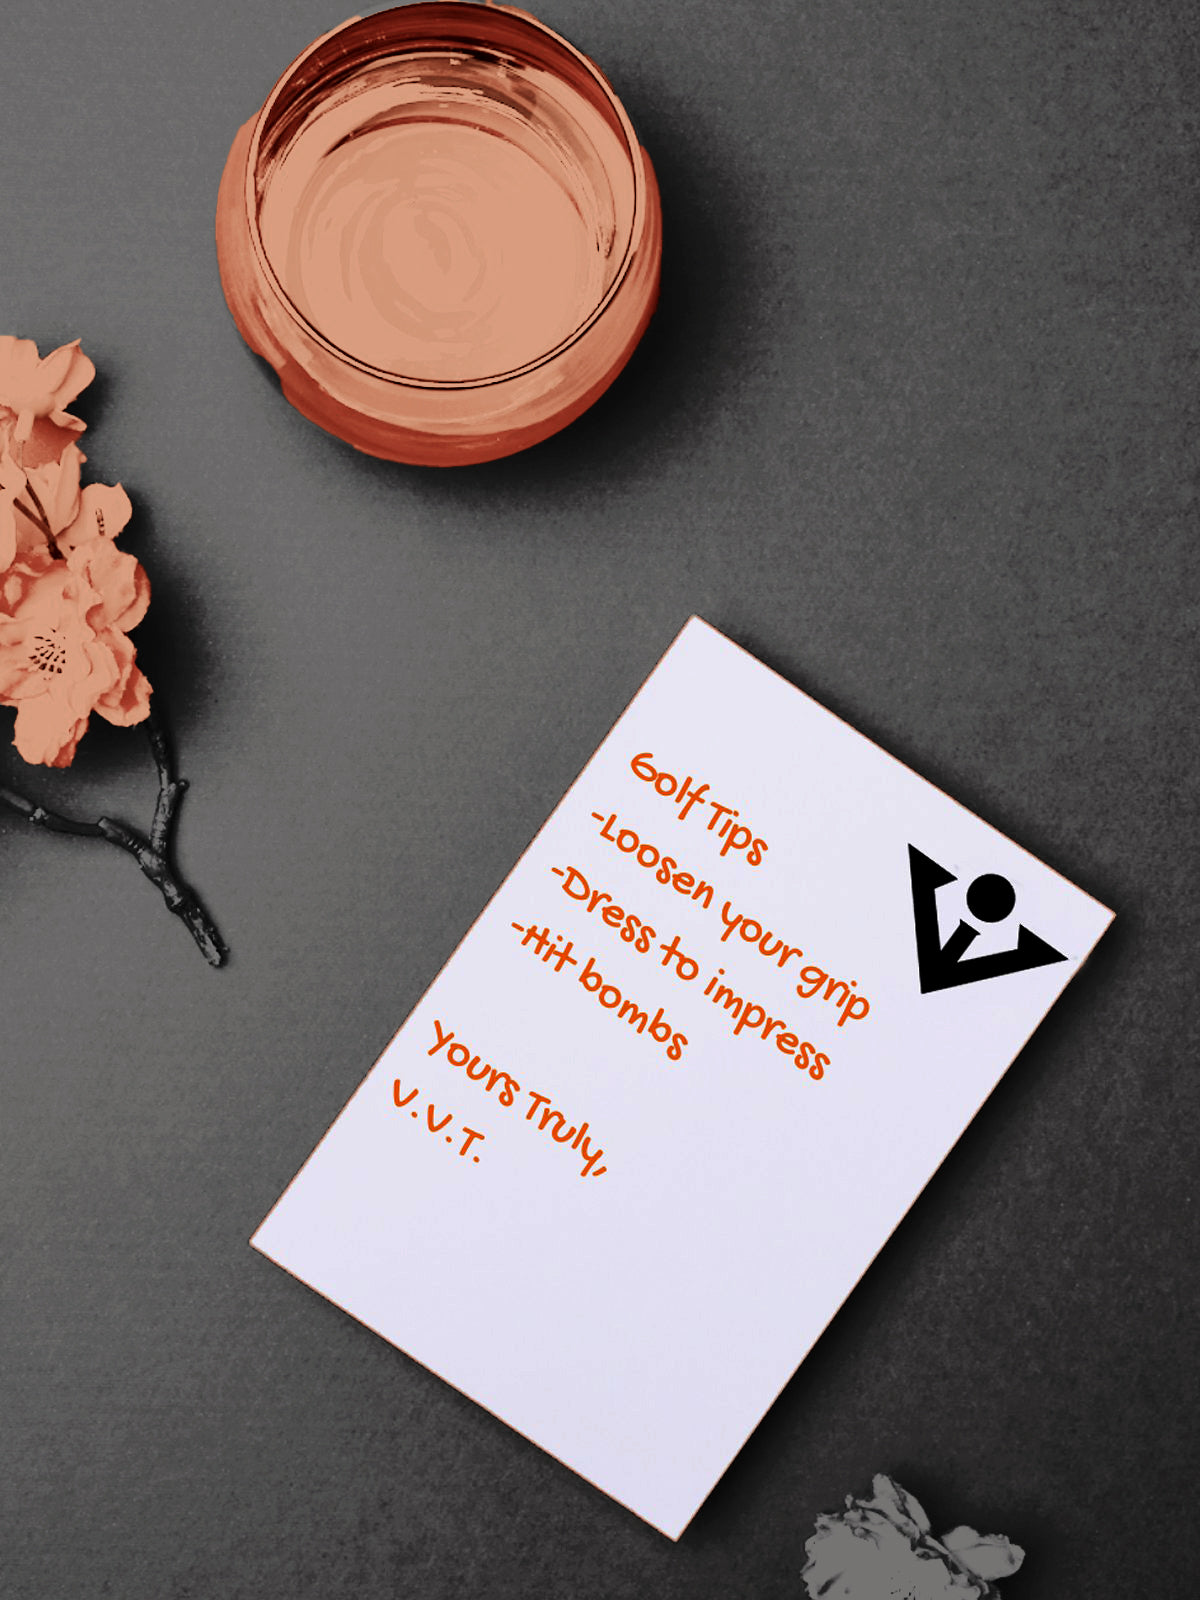 An image of a flower and bowl next to a note with the VivanTee logo.